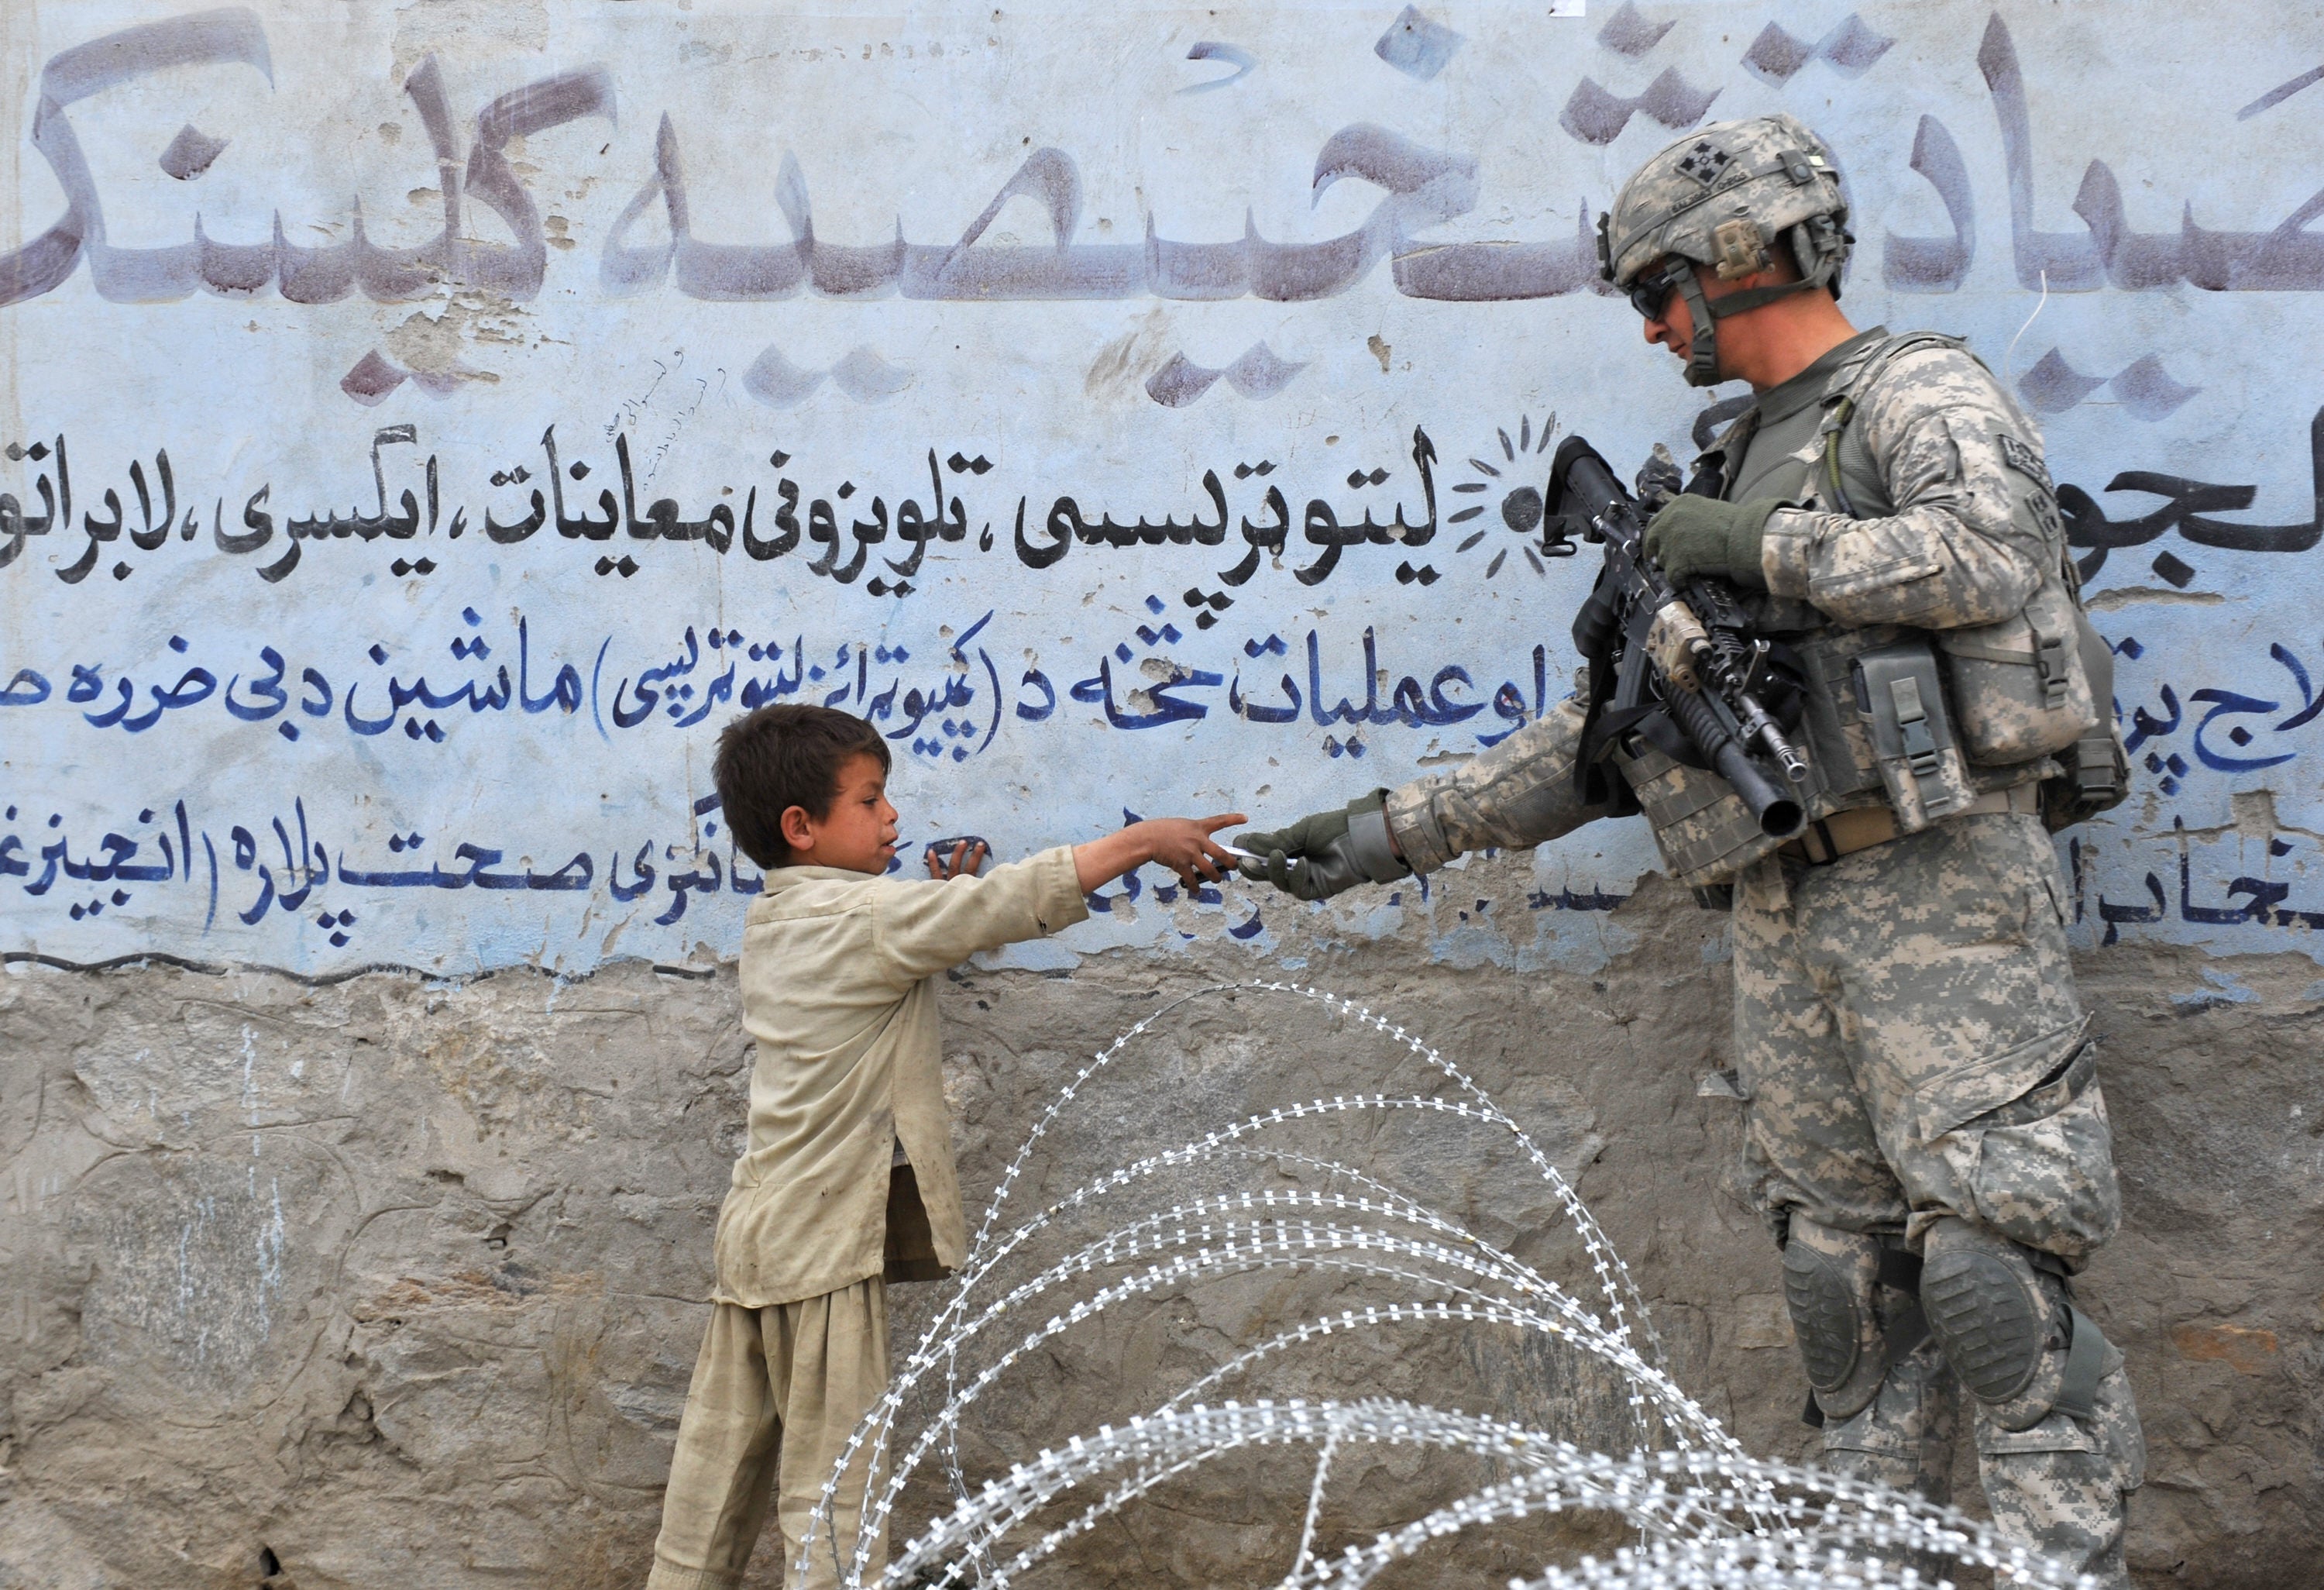 US soldier presents a gift to an Afghan child during a patrol at Khogiani in Langarhar in 2010